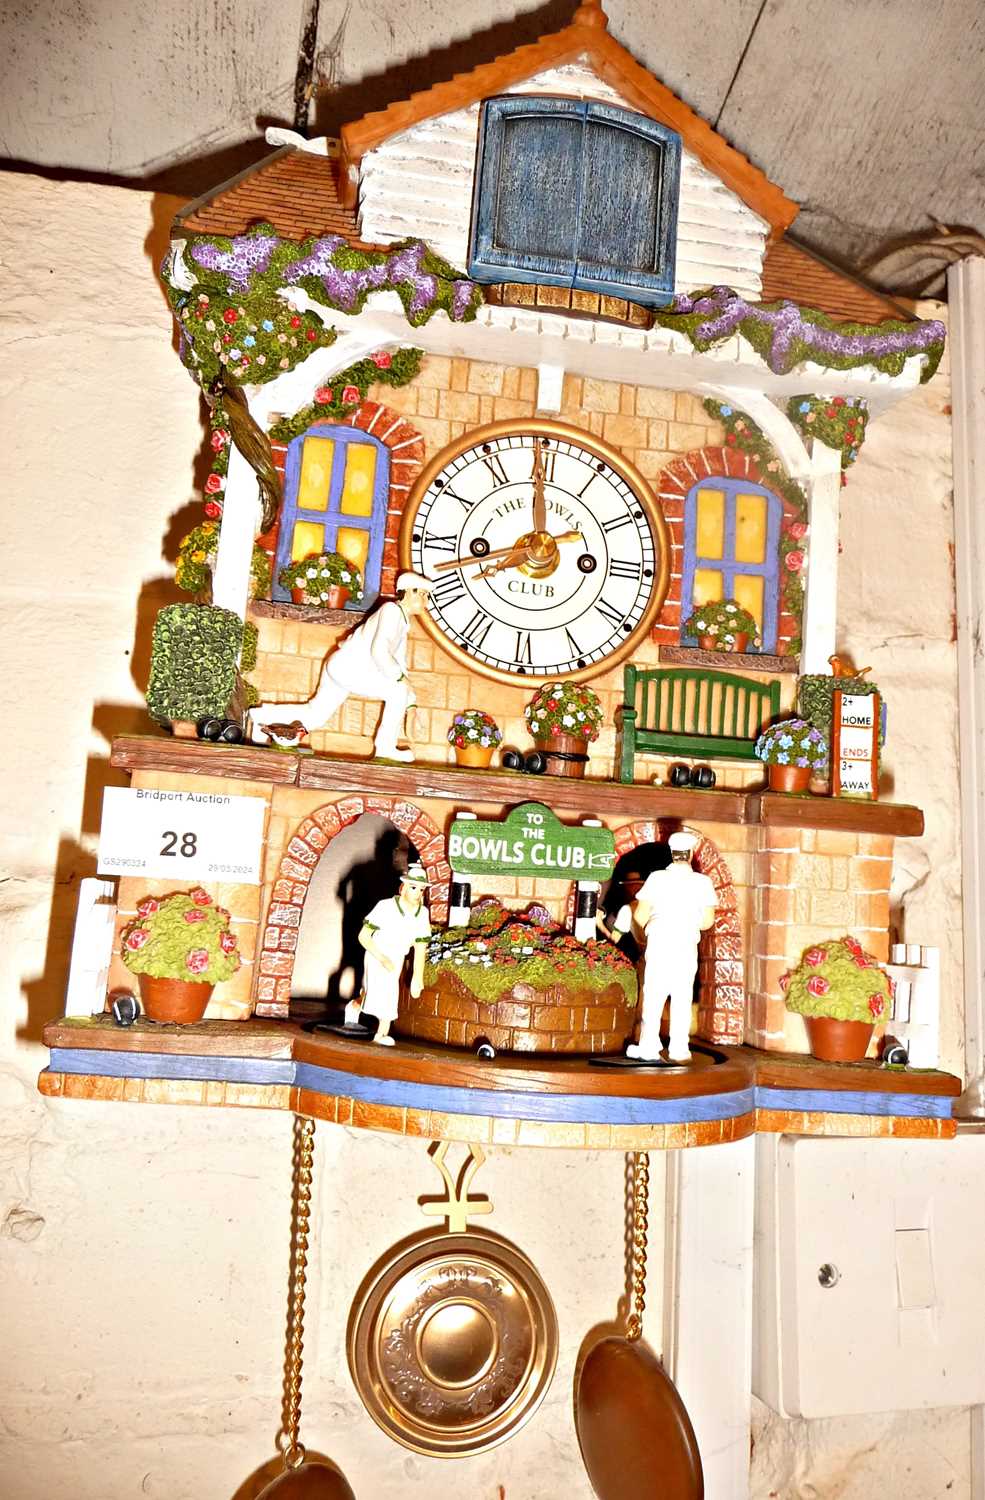 Novelty automaton cuckoo clock "Spirit of Bowls" with moving bowlers from a Bowls Club building - Image 2 of 2